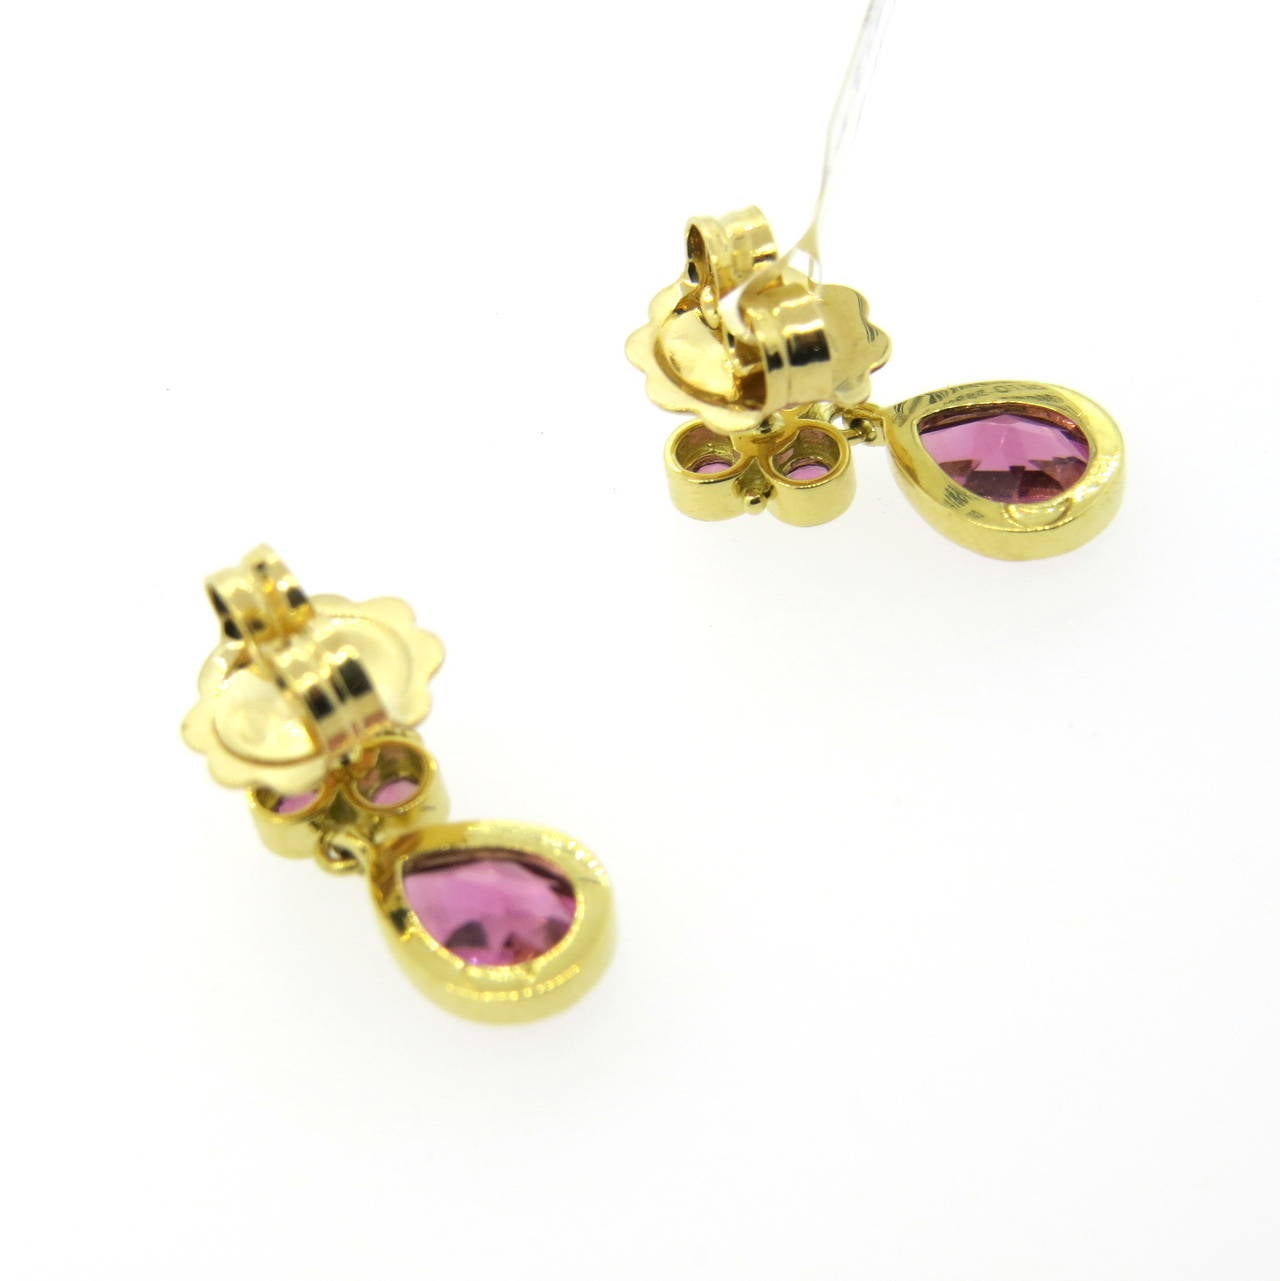 A pair of 18k yellow gold earrings set with 2.62ctw of pink tourmalines.  Crafted by Temple St. Clair, the earrings measure 19mm x 7mm and weigh 5.1 grams.